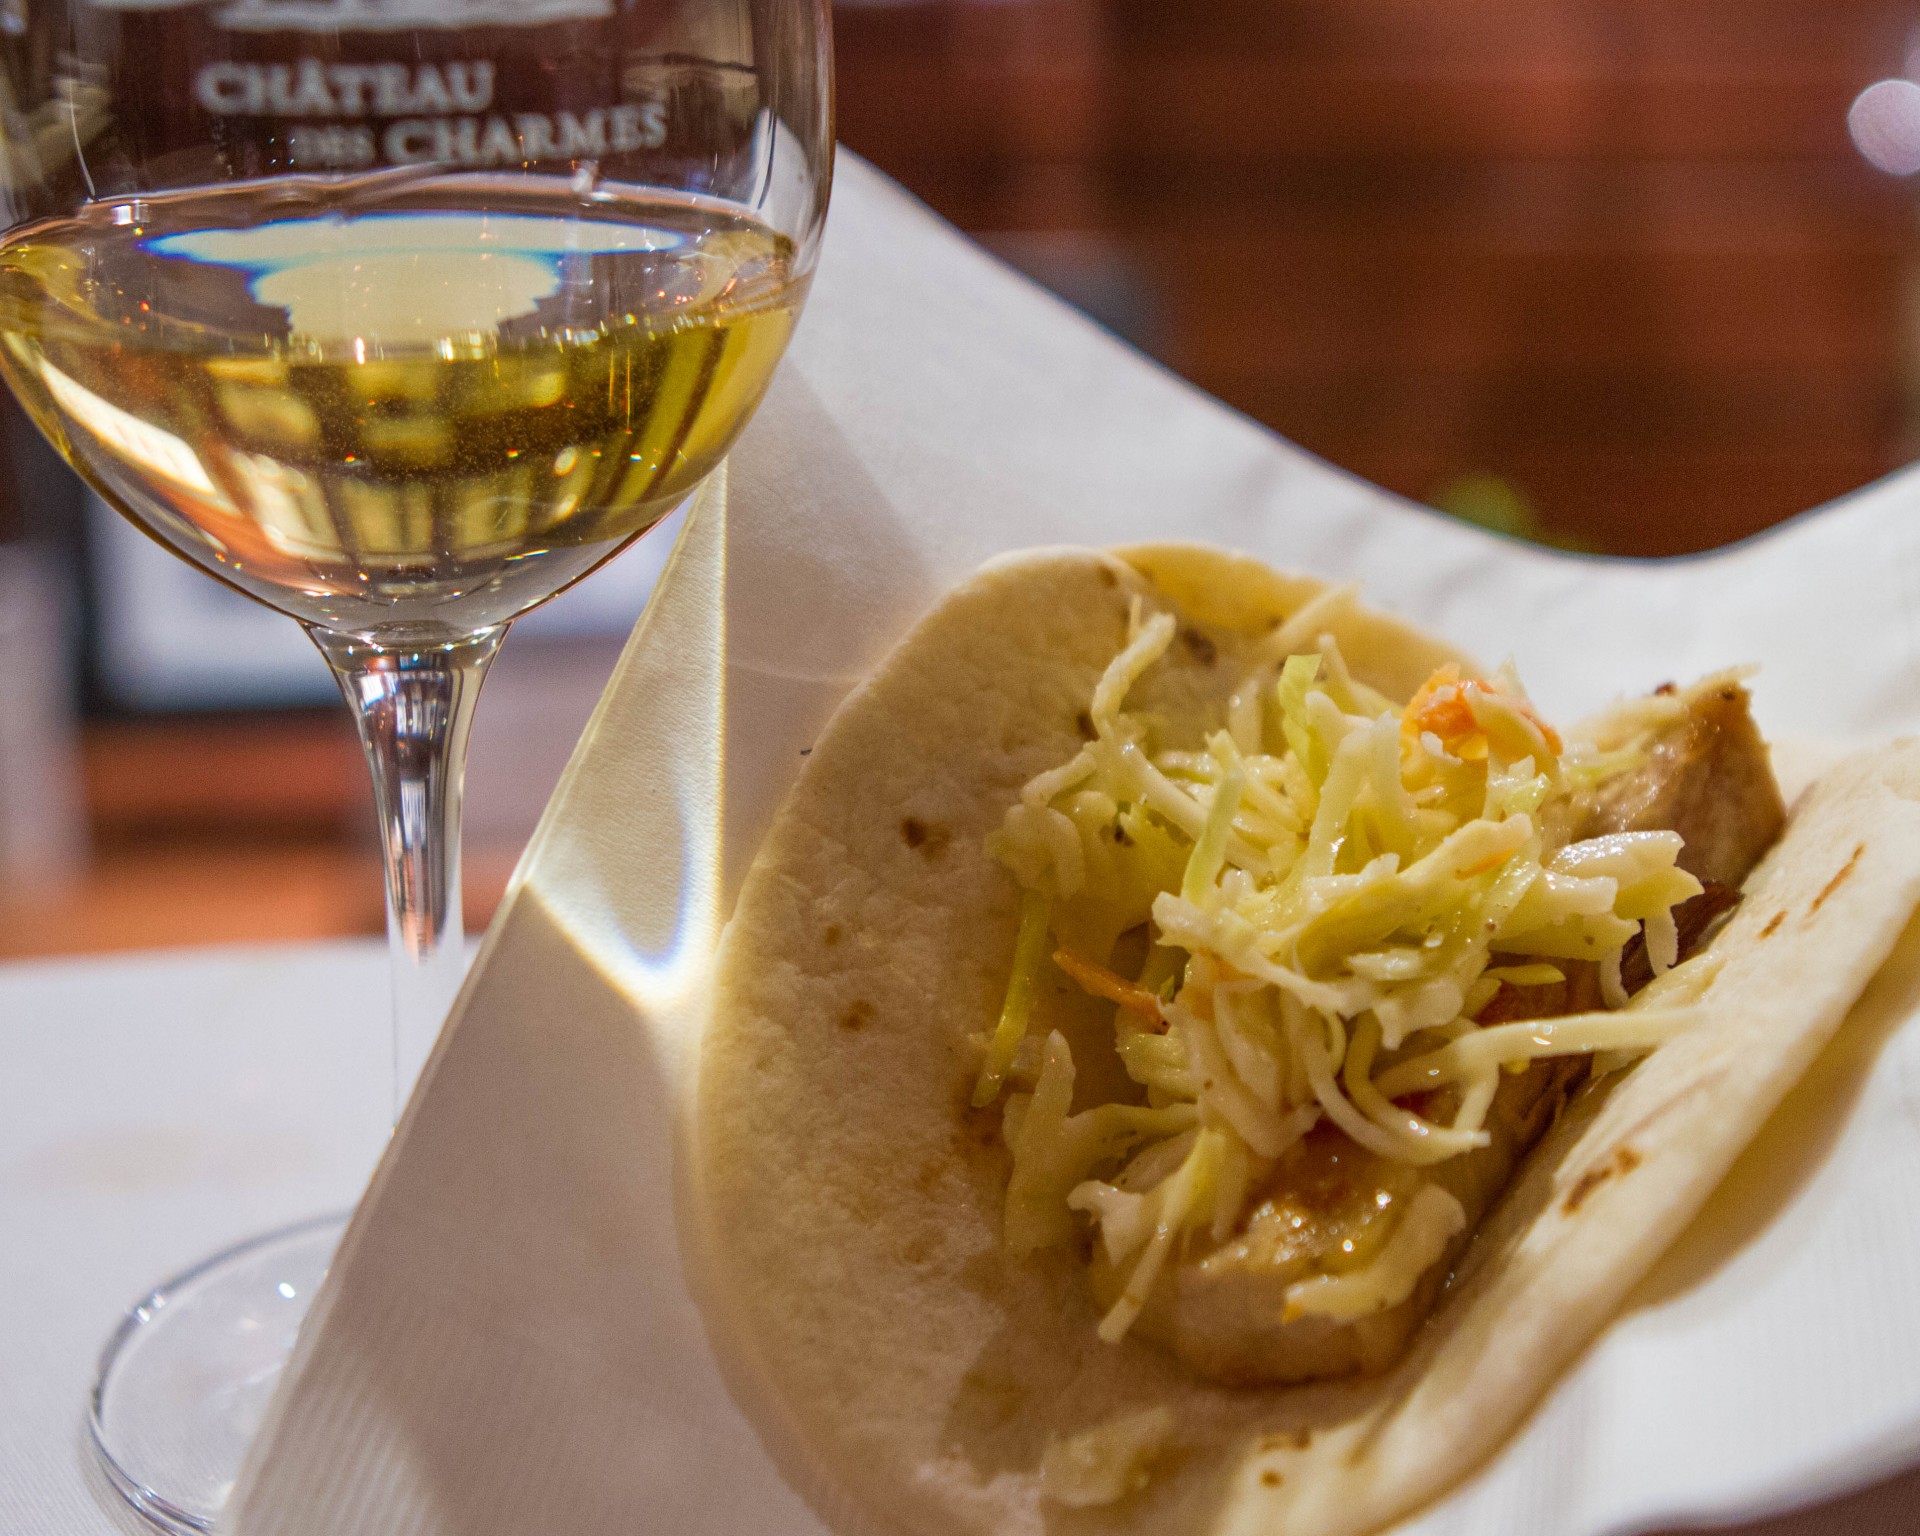 Glass of Chateau des Charmes icewine served with pork belly taco at Chateau des Charmes winery in Niagara-on-the-Lake during the Niagara Icewine Festival